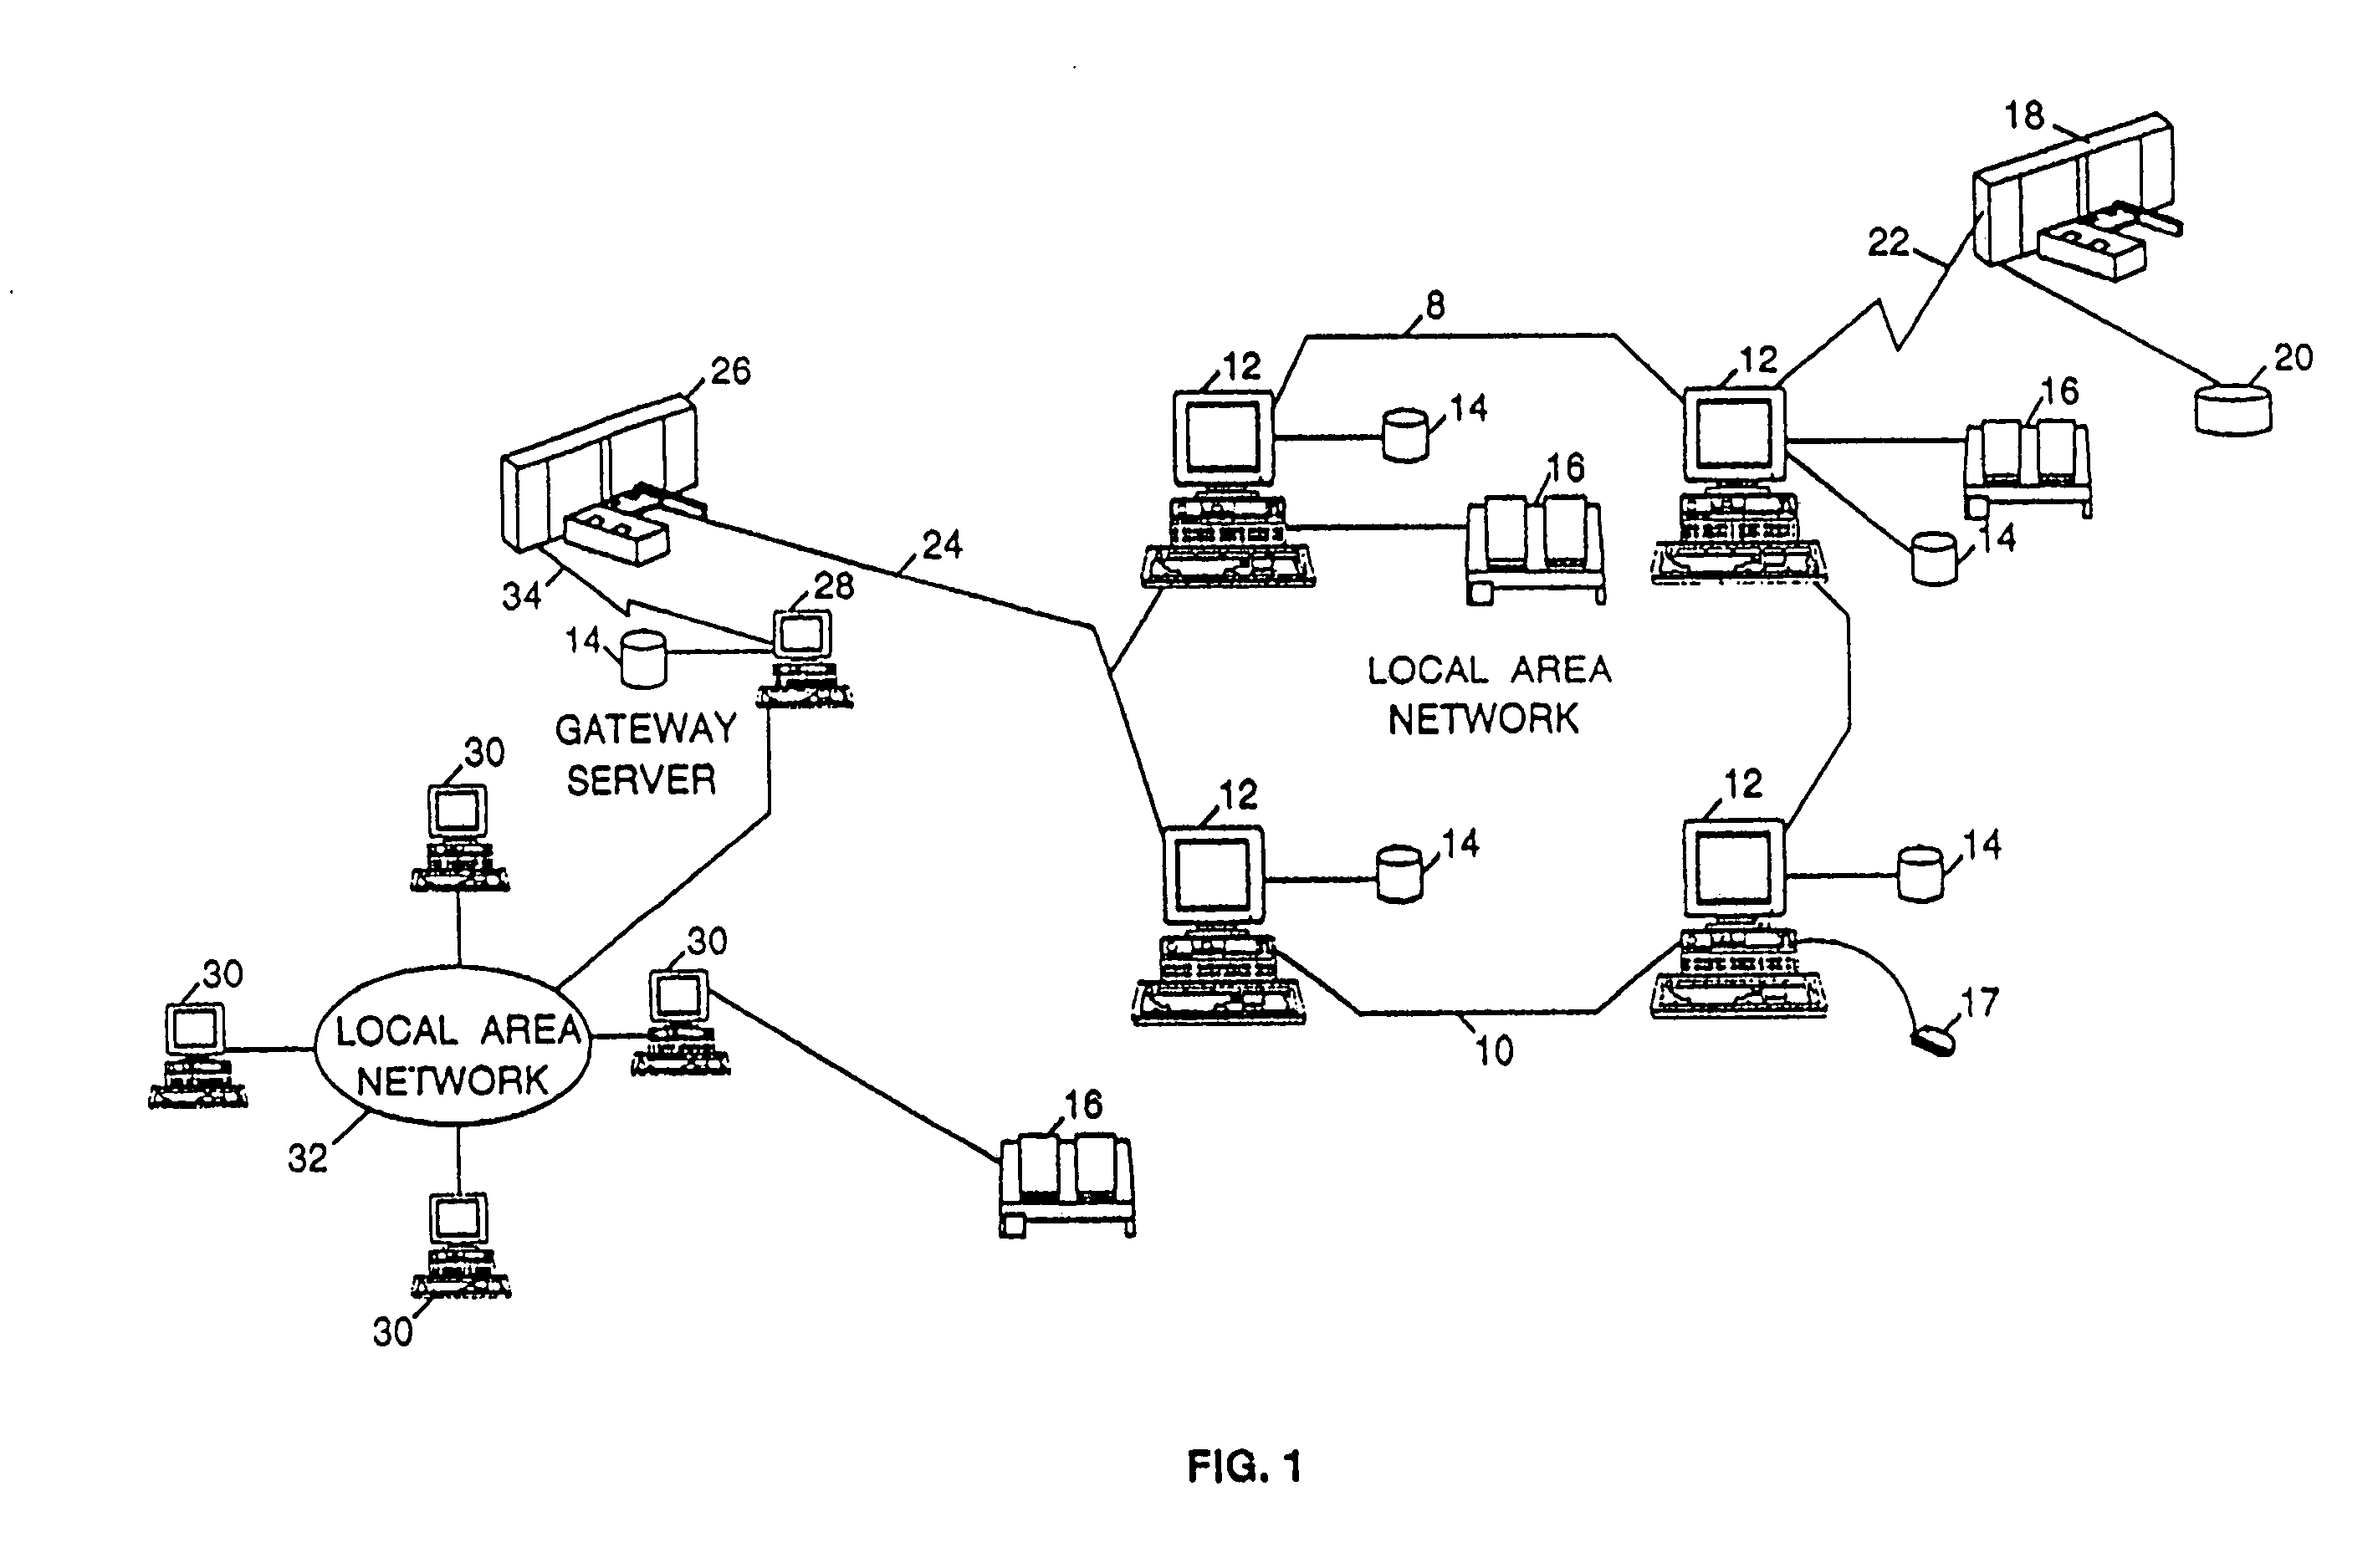 Method, system, computer program product, and article of manufacture for updating a computer program according to a stored configuration